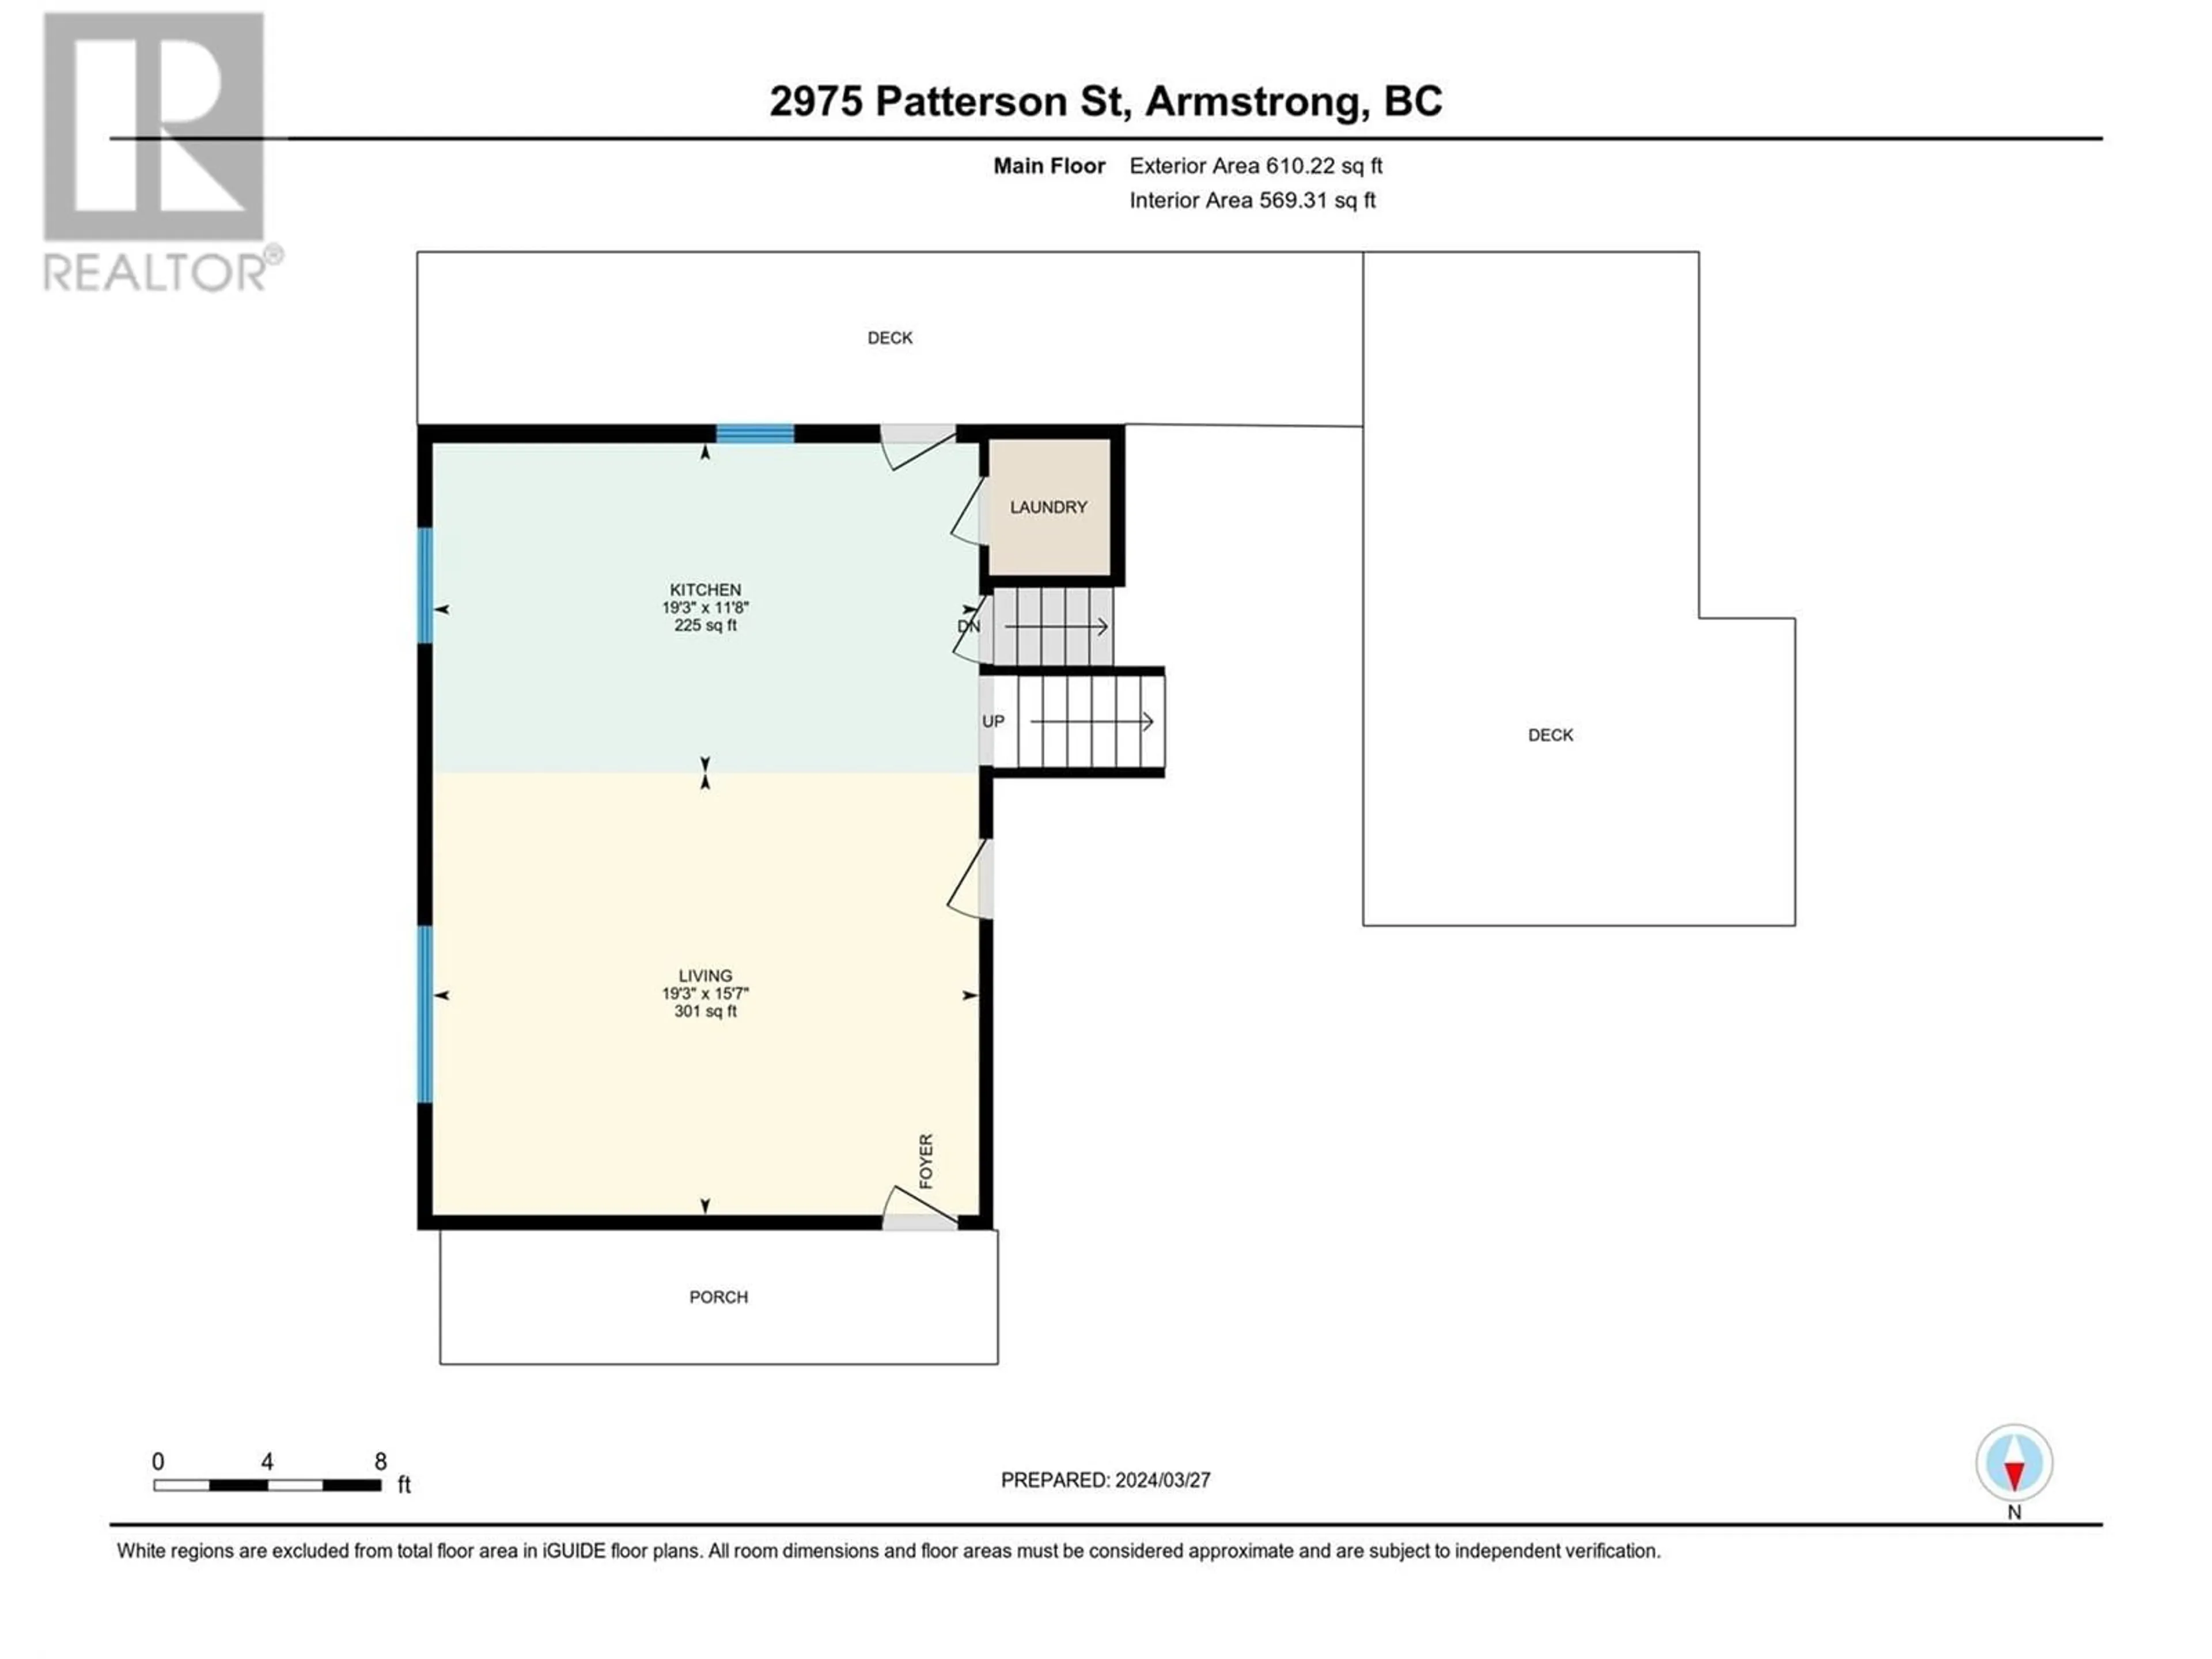 Floor plan for 2975 Patterson Street, Armstrong British Columbia V0E1B2